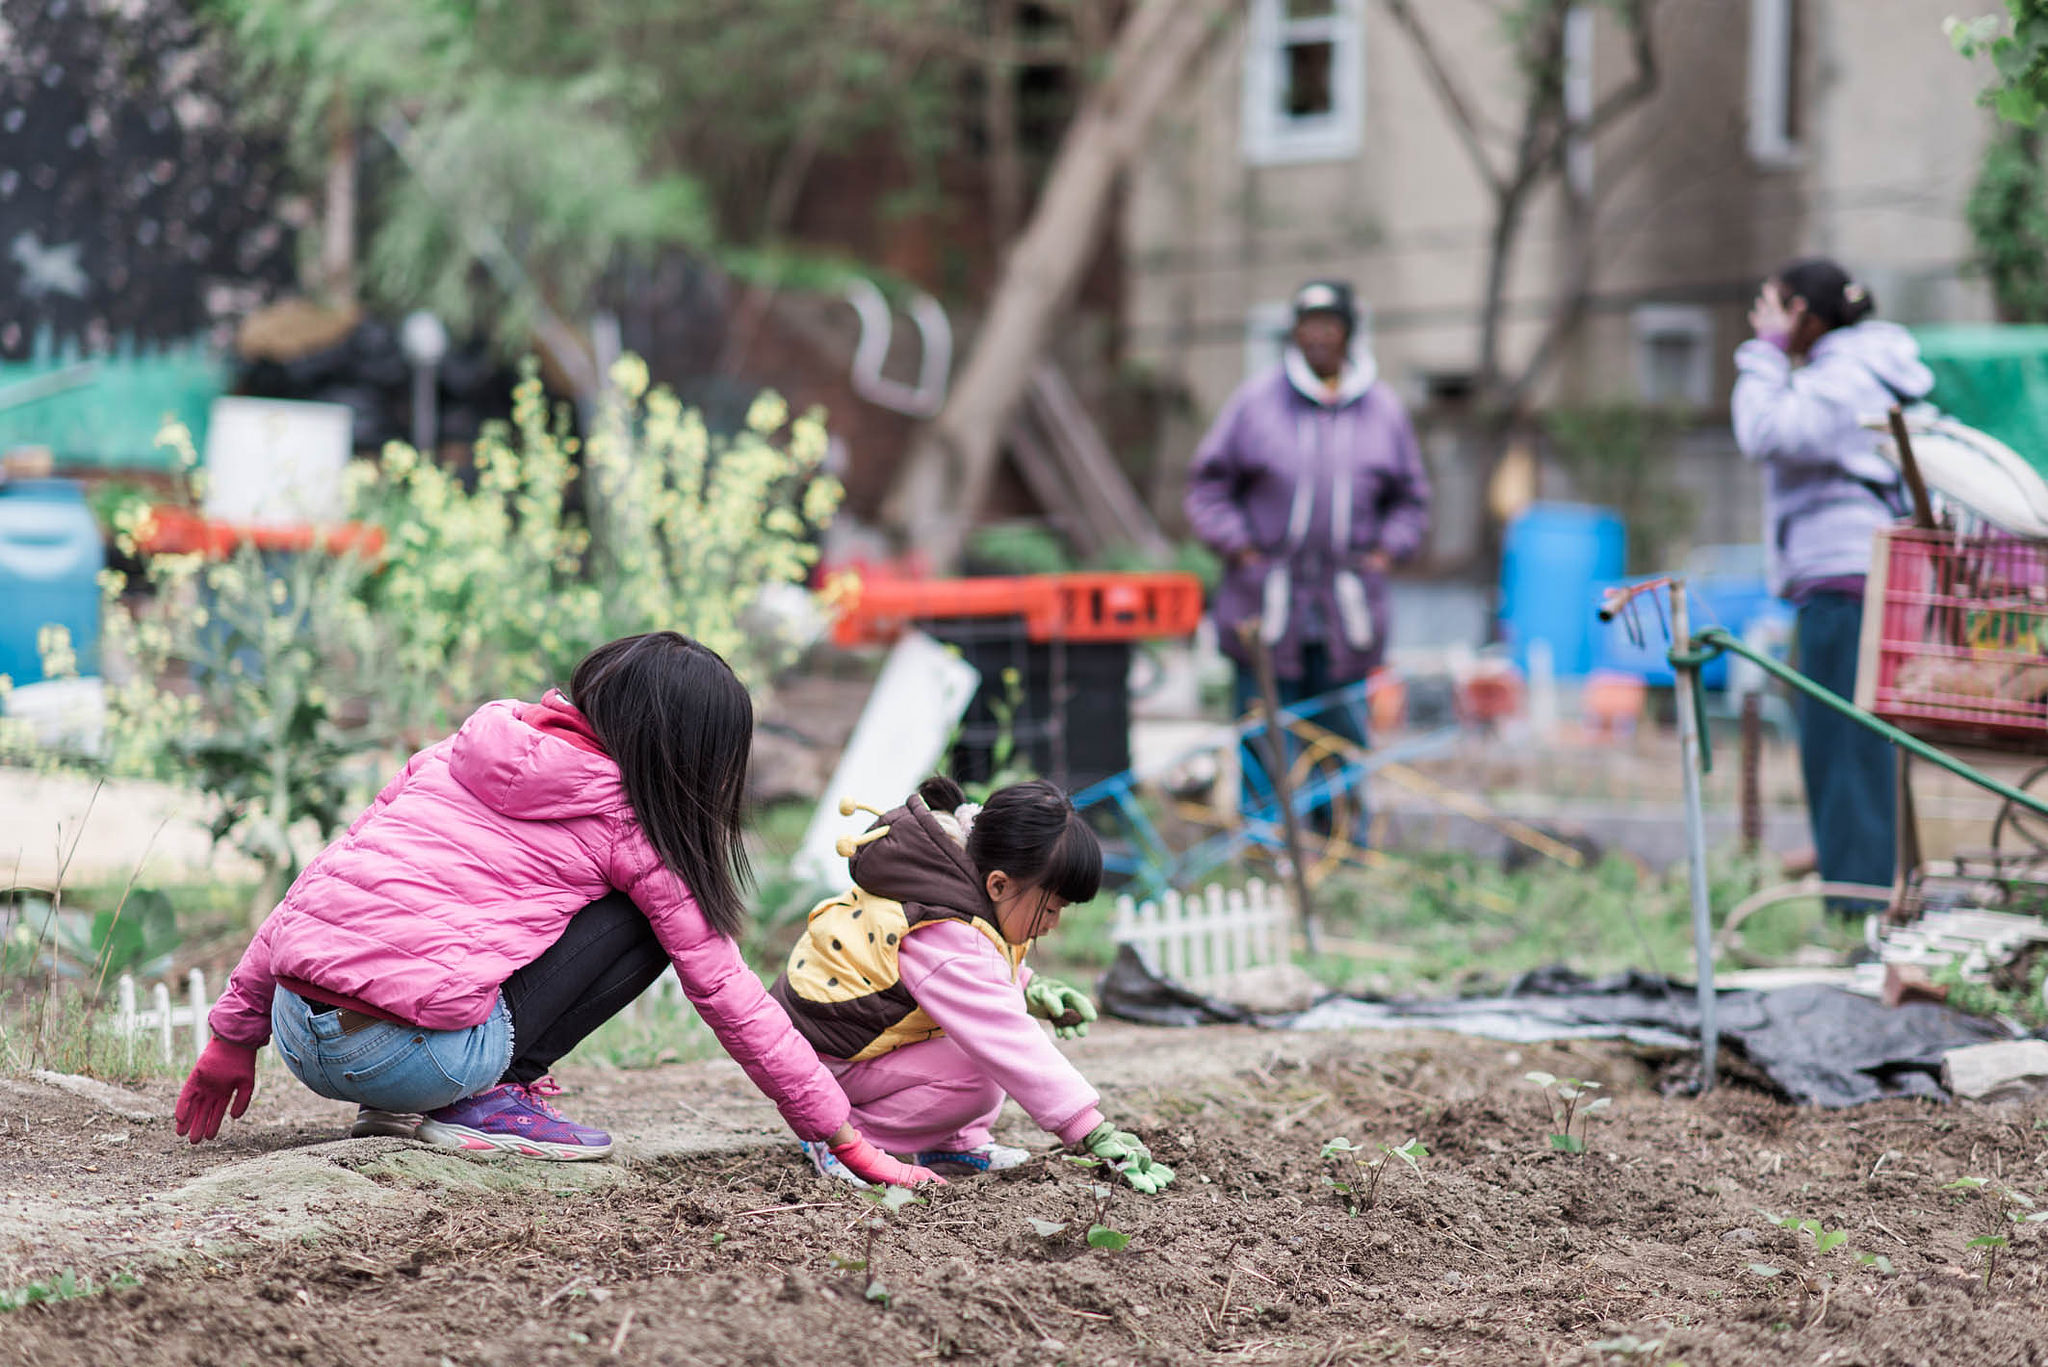 Soil testing day at 25th and Tasker garden | By Ali Marisa Photography